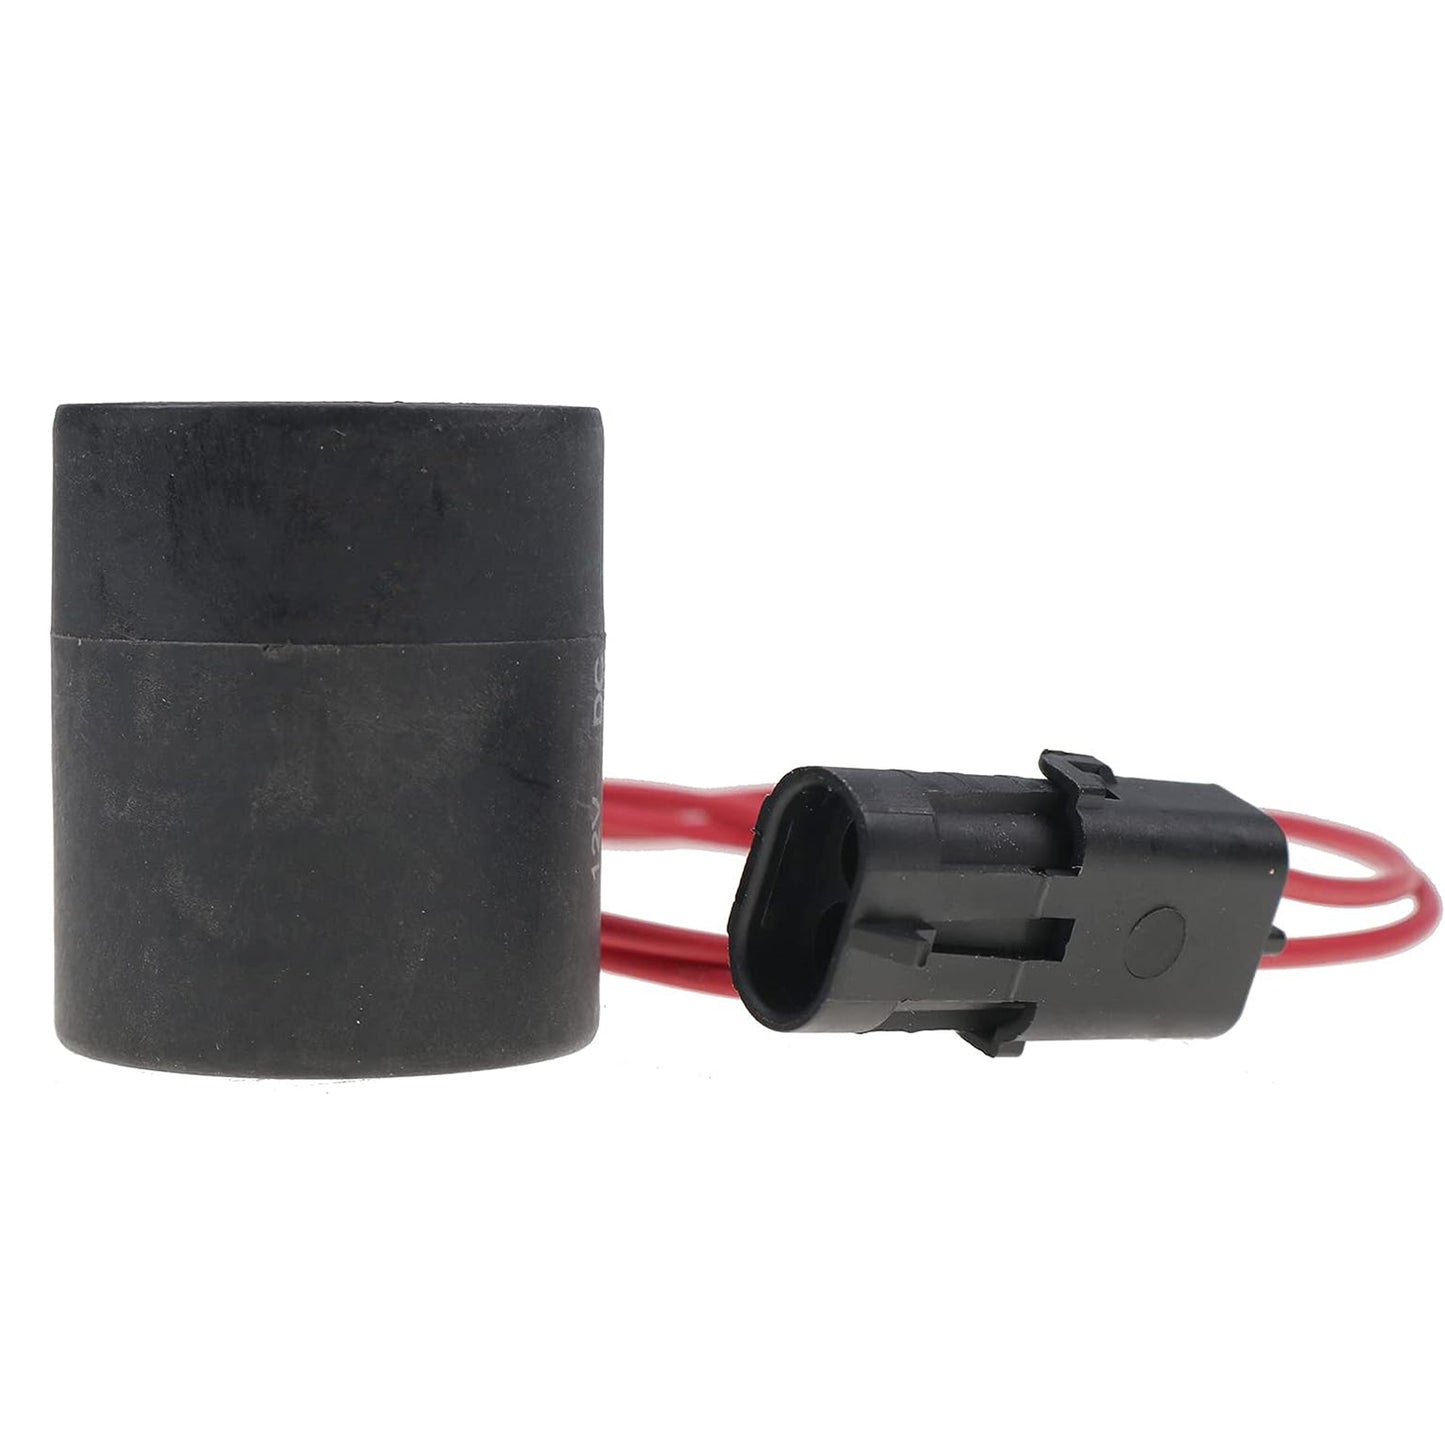 6359412 Solenoid Valve Coil Compatible with Hydraforce Stems 10/12/16/38/58 Series 5/8" Hole